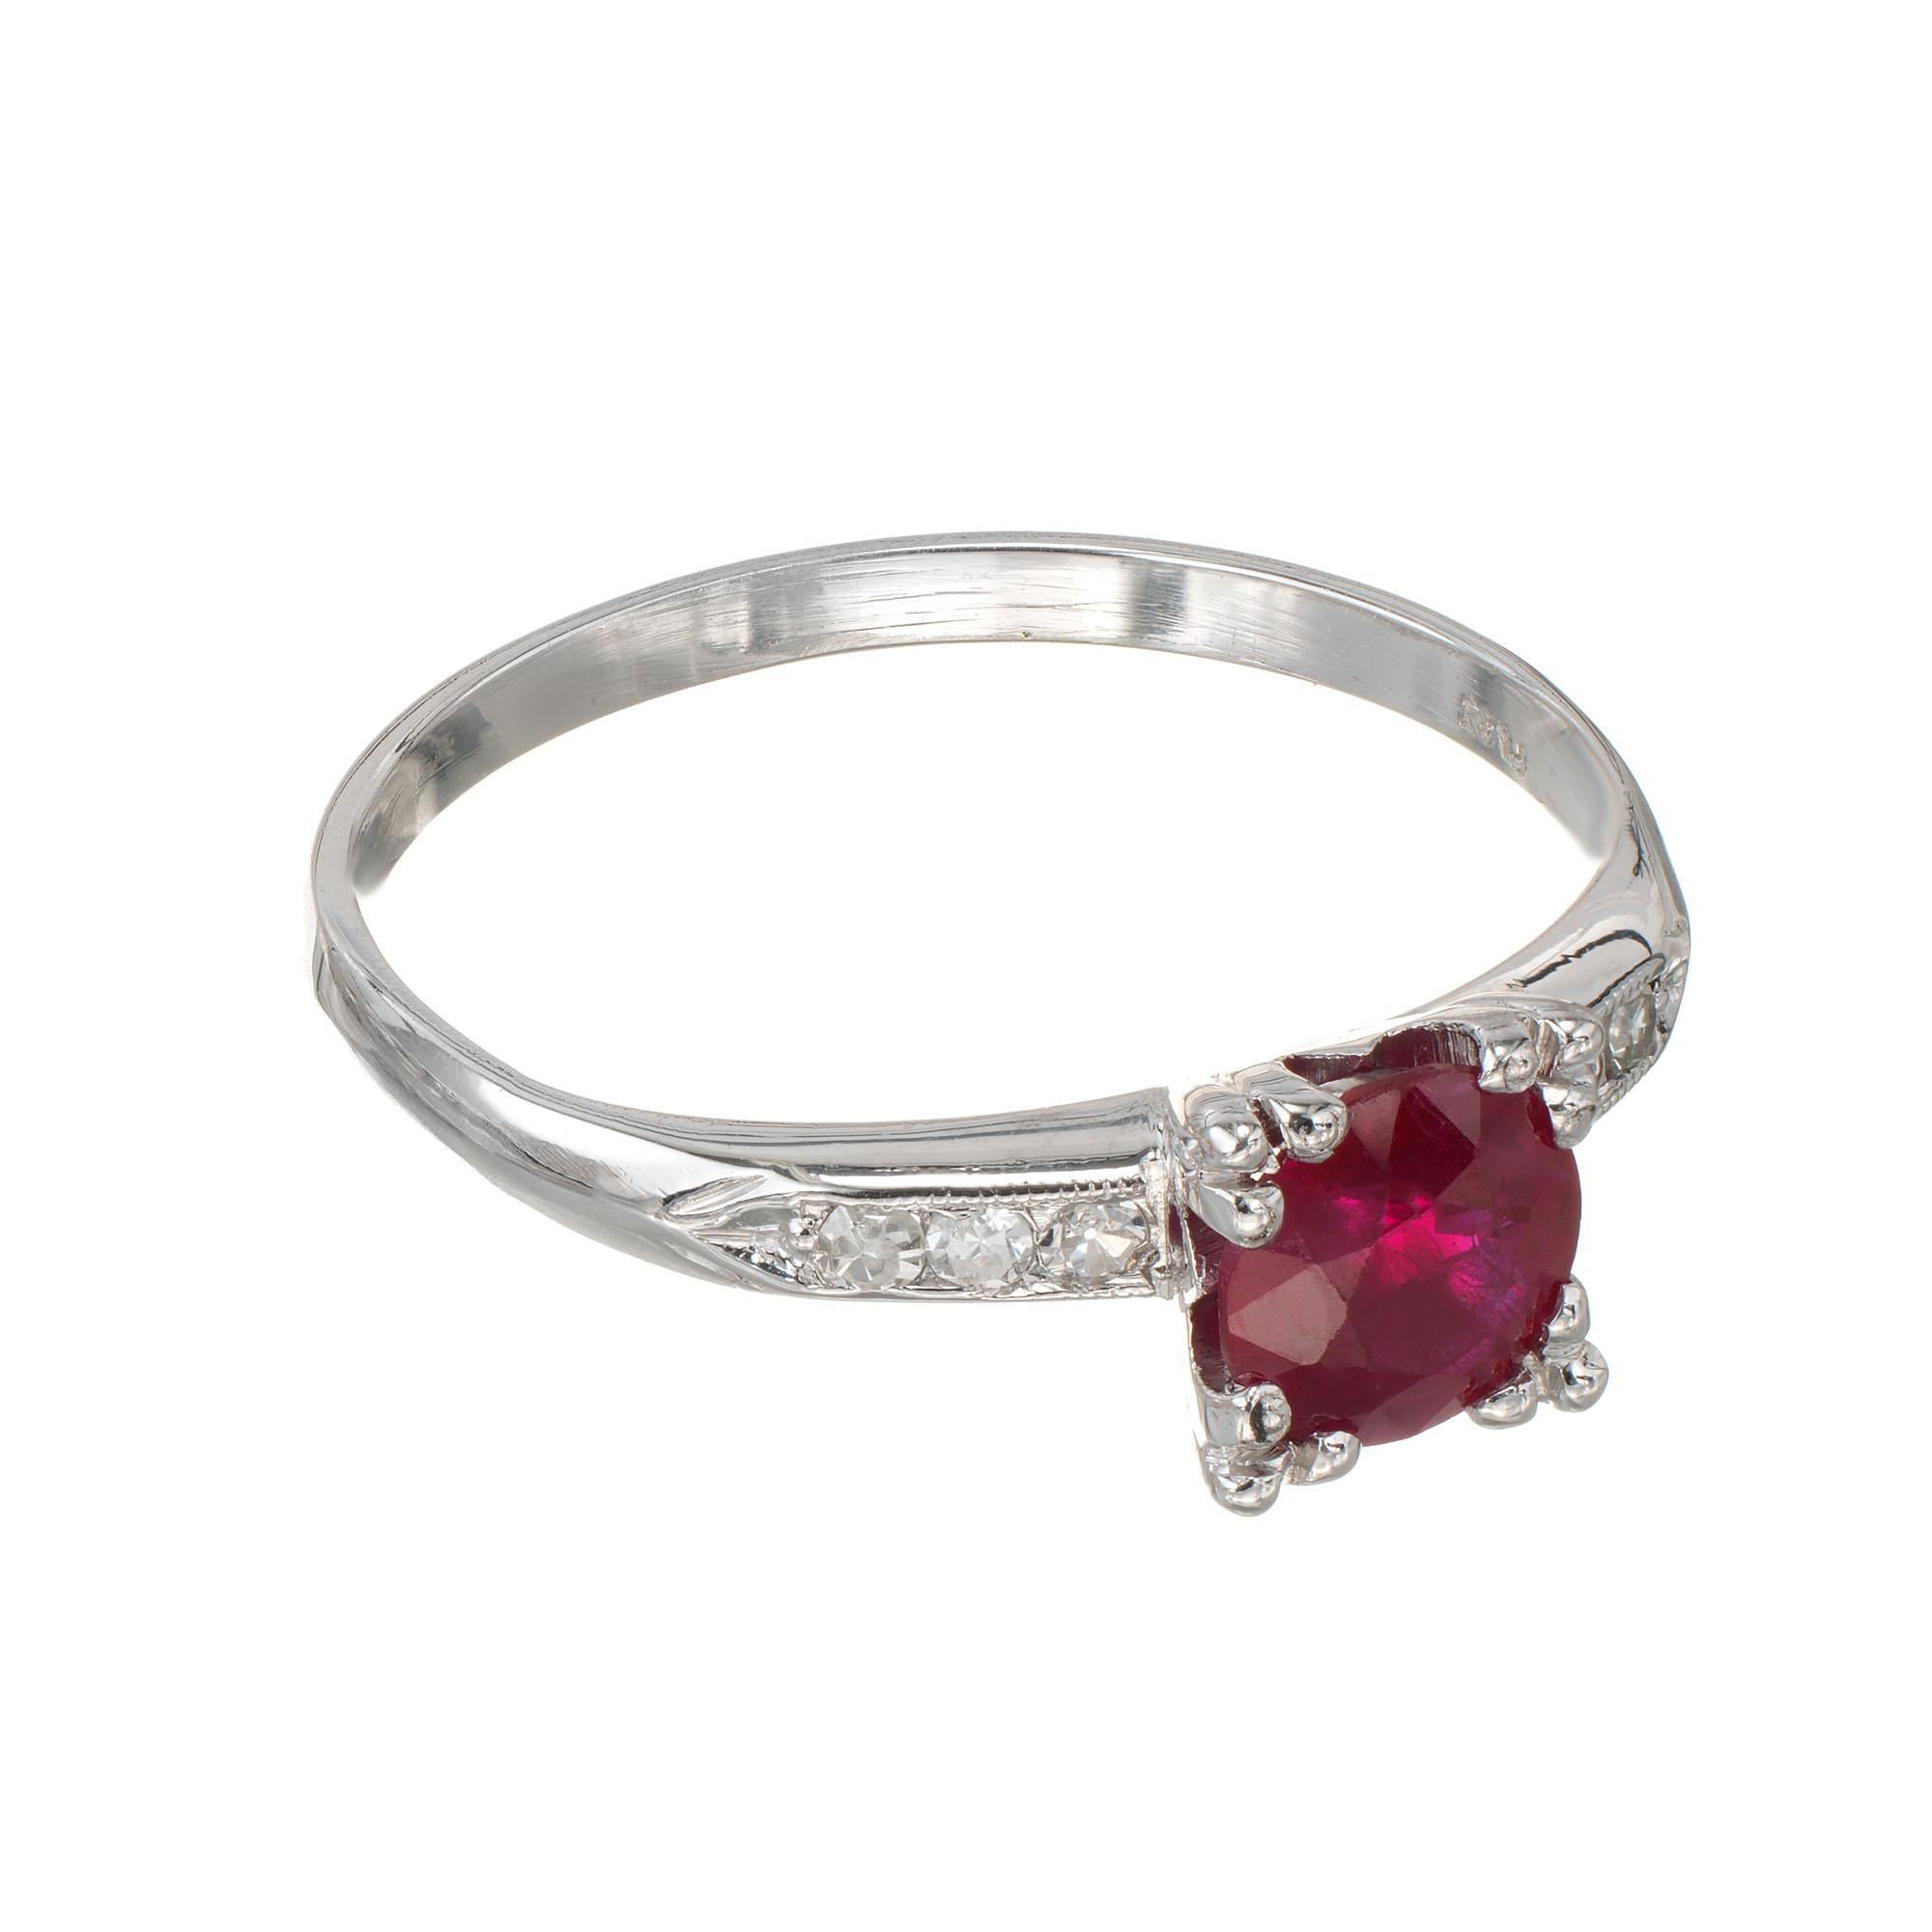 1940's Ruby and diamond handmade fishtail engagement ring. Ruby center stone with 6 round accent diamonds. GIA certified natural ruby, heated with moderate residue, natural wear, minor surface abrasions. 

1 round red ruby, approx. .81cts SI GIA